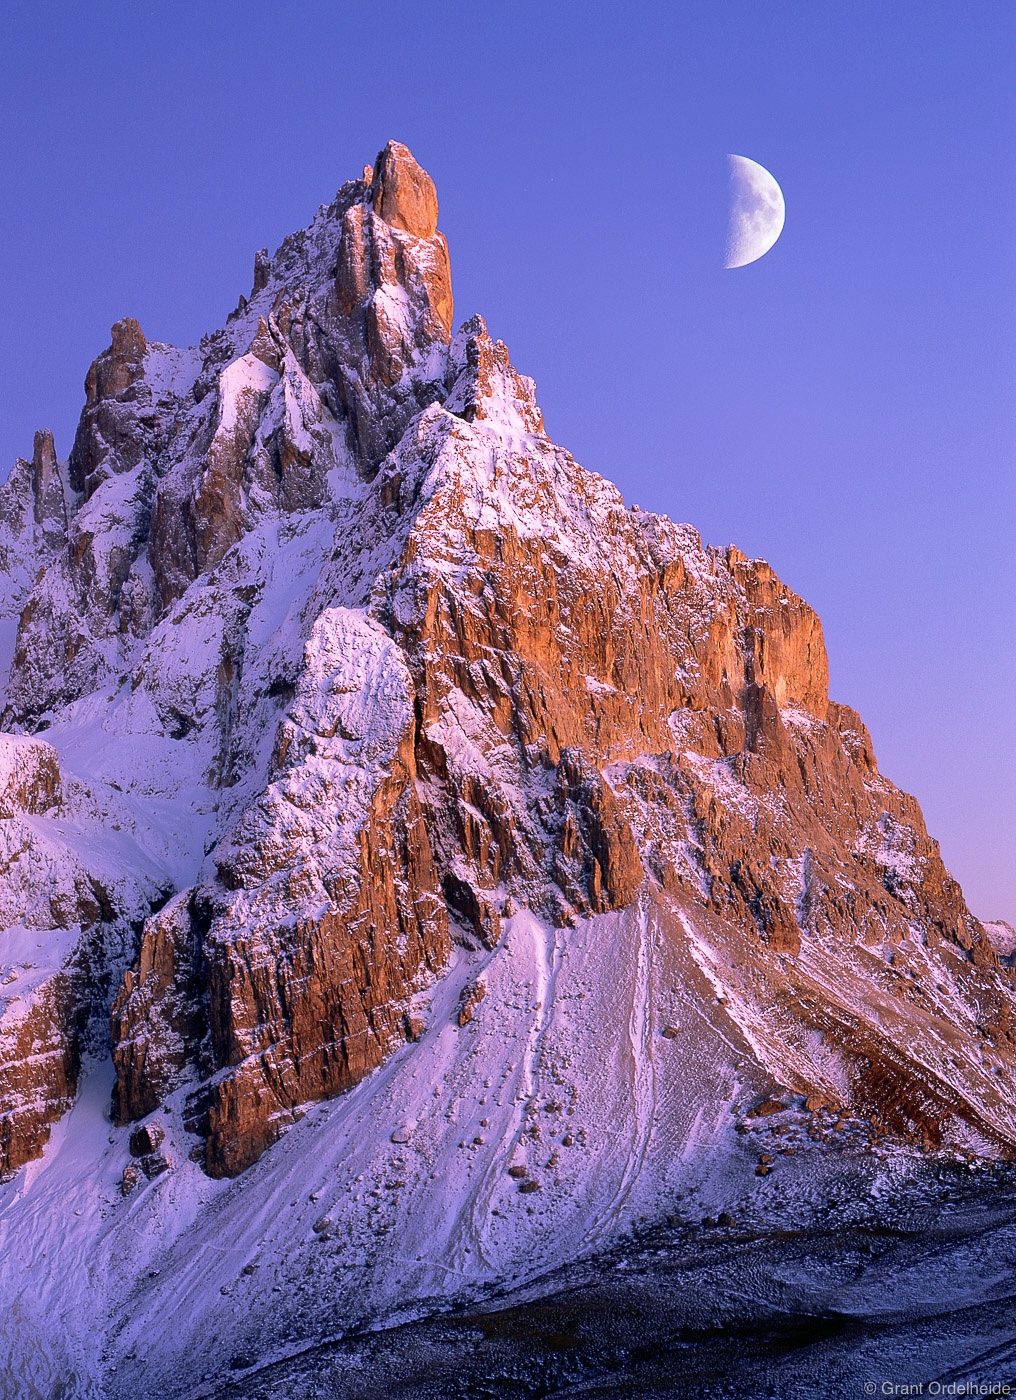 Cimon della Pala and the moon made with an in camera double exposure.